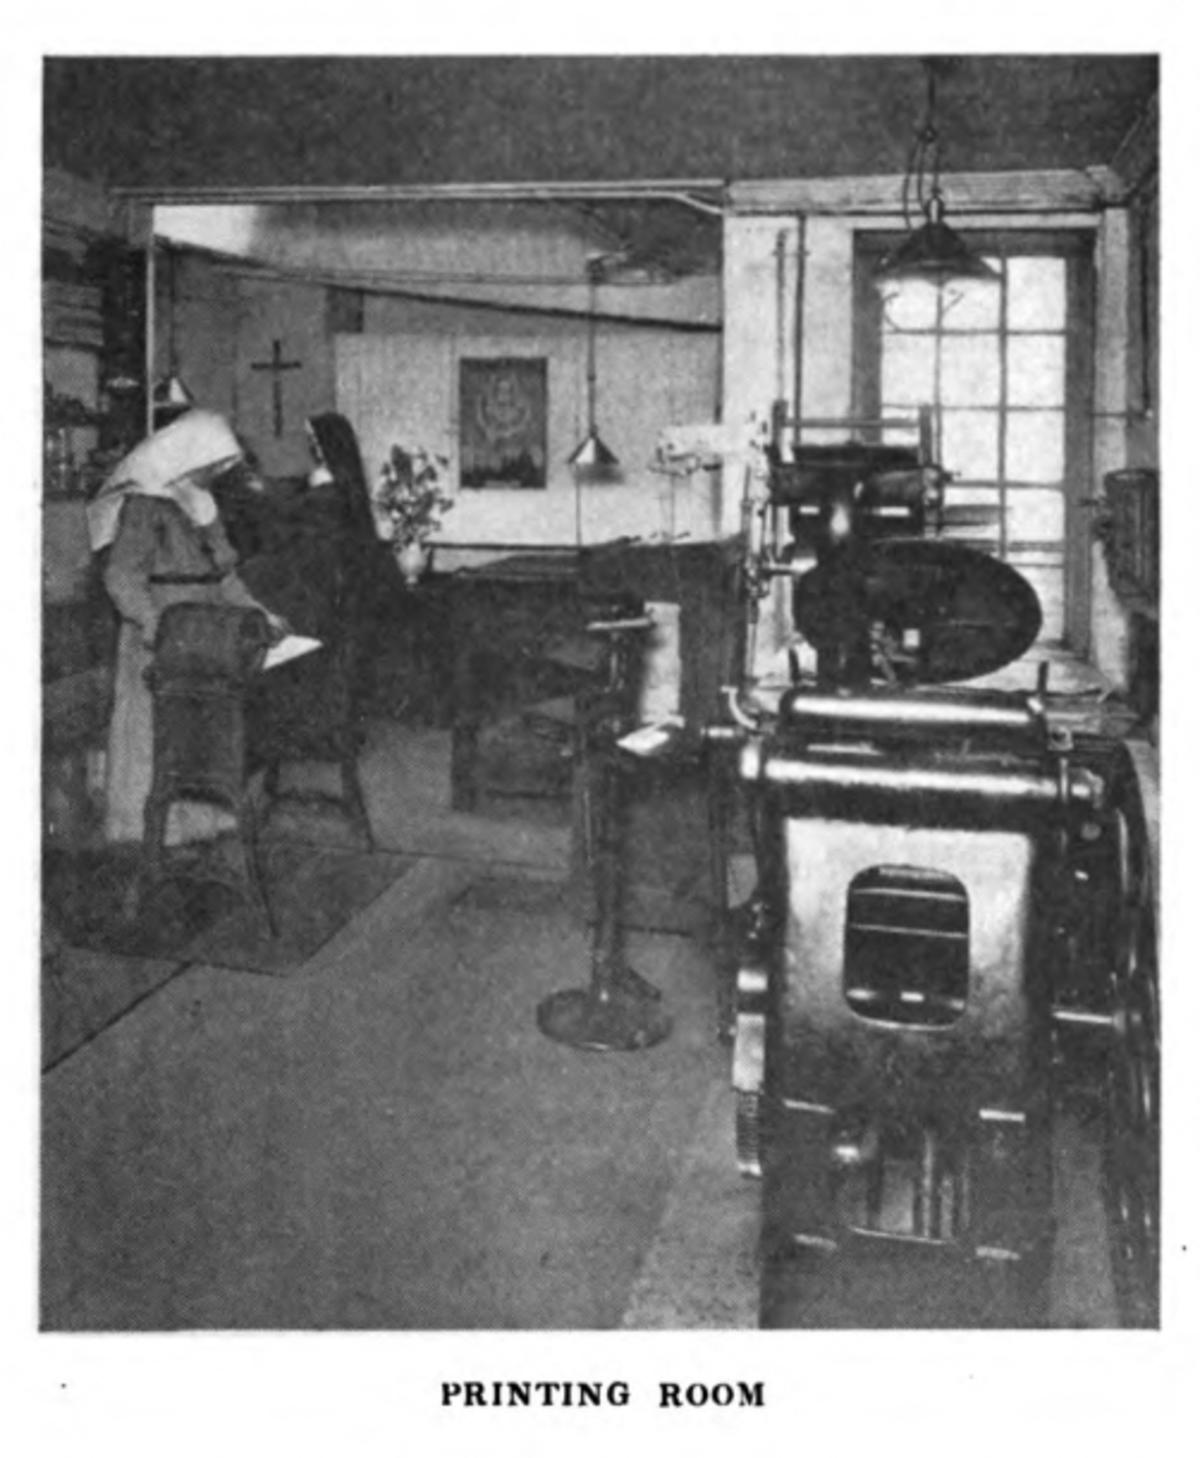 Printing Room at Order of St. Anne convent, 44 Temple Street, circa 1923